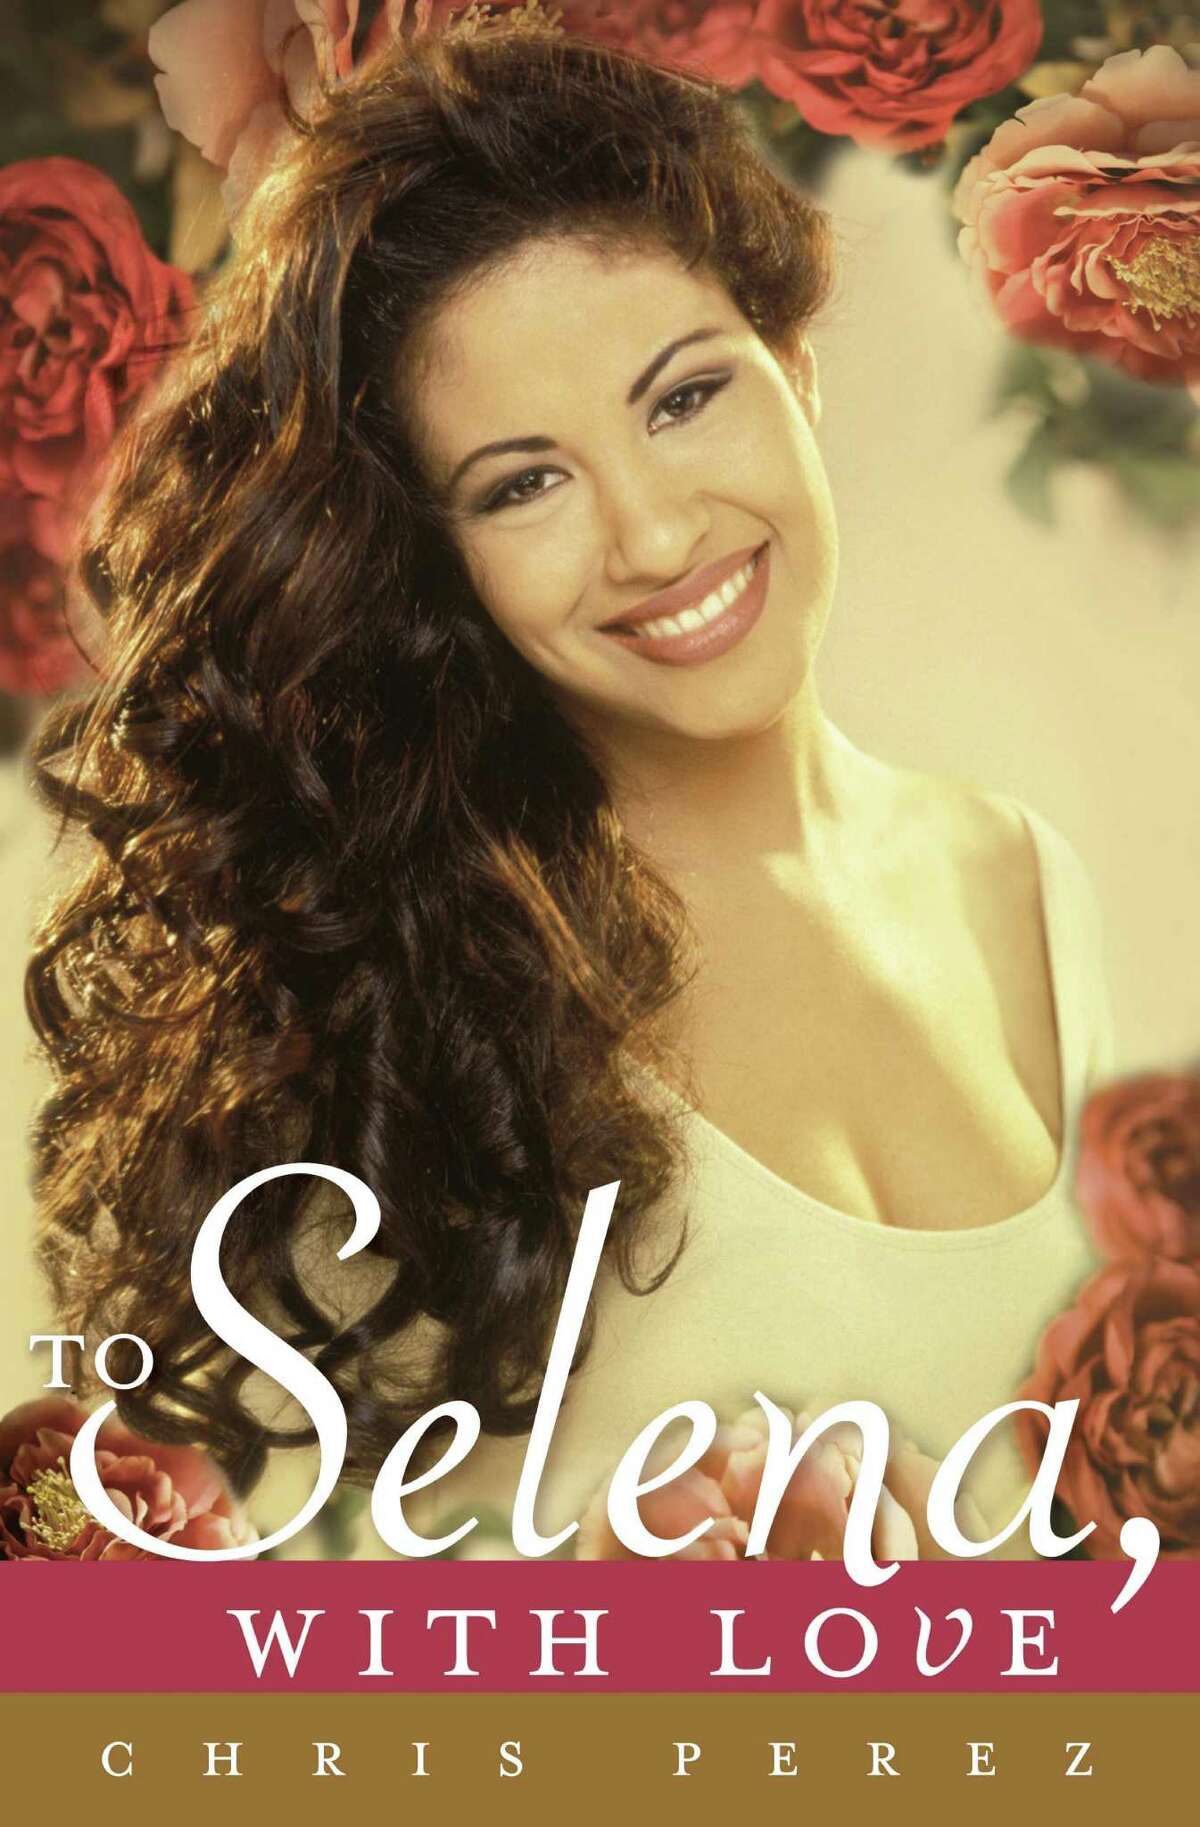 An Investigation Discovery series looks at the 1995 slaying of Tejano star Selena Quintanilla Perez. It is set to air June 5.